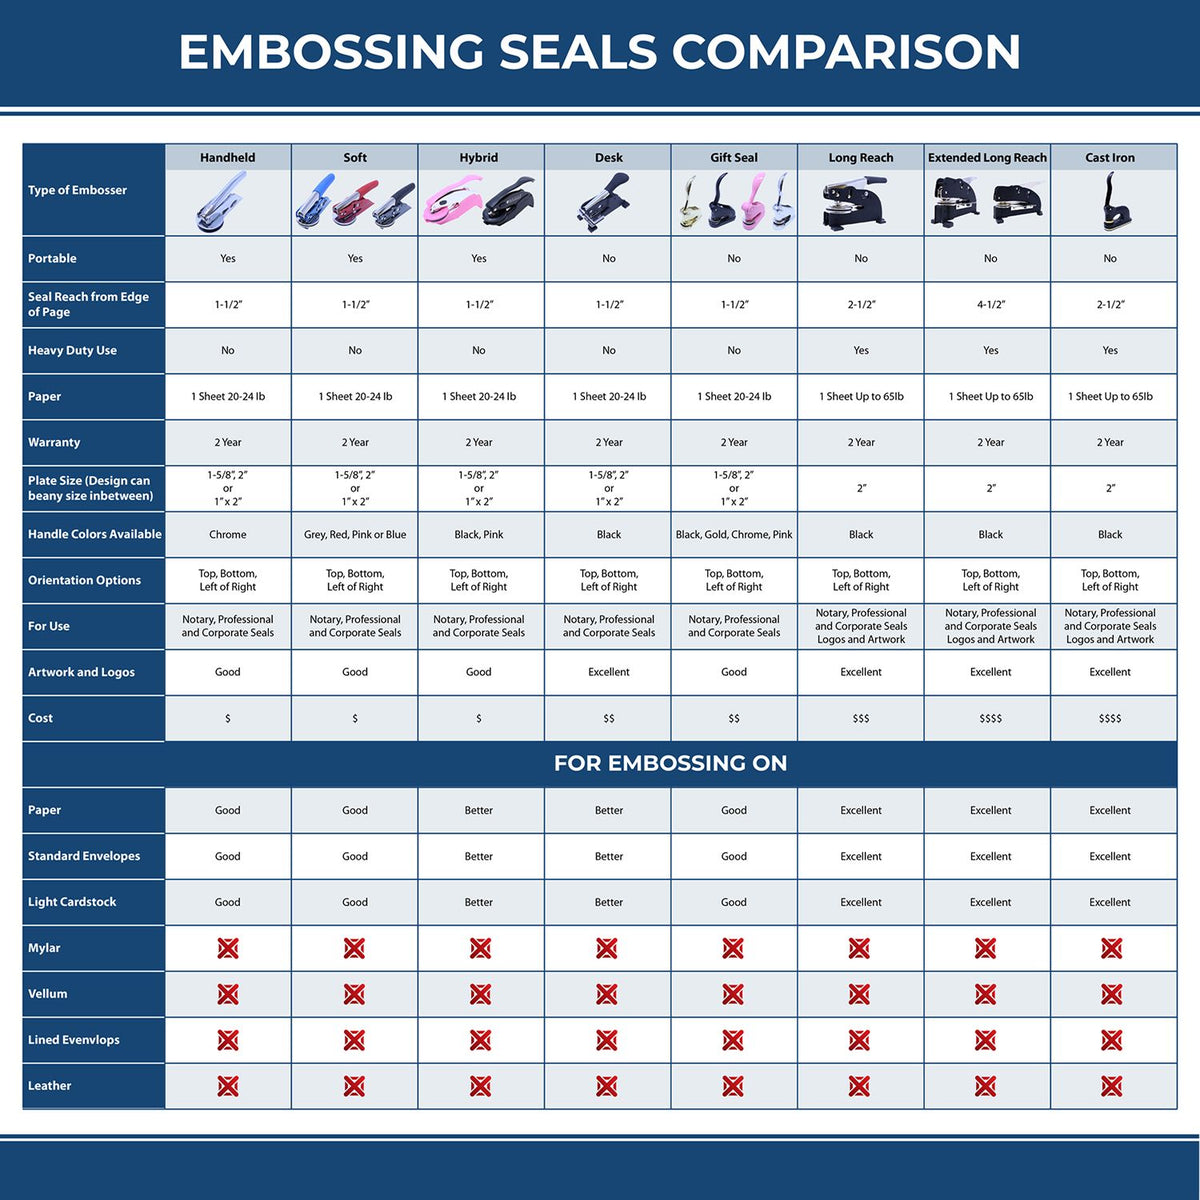 A comparison chart for the different types of mount models available for the Handheld Alabama Professional Engineer Embosser.